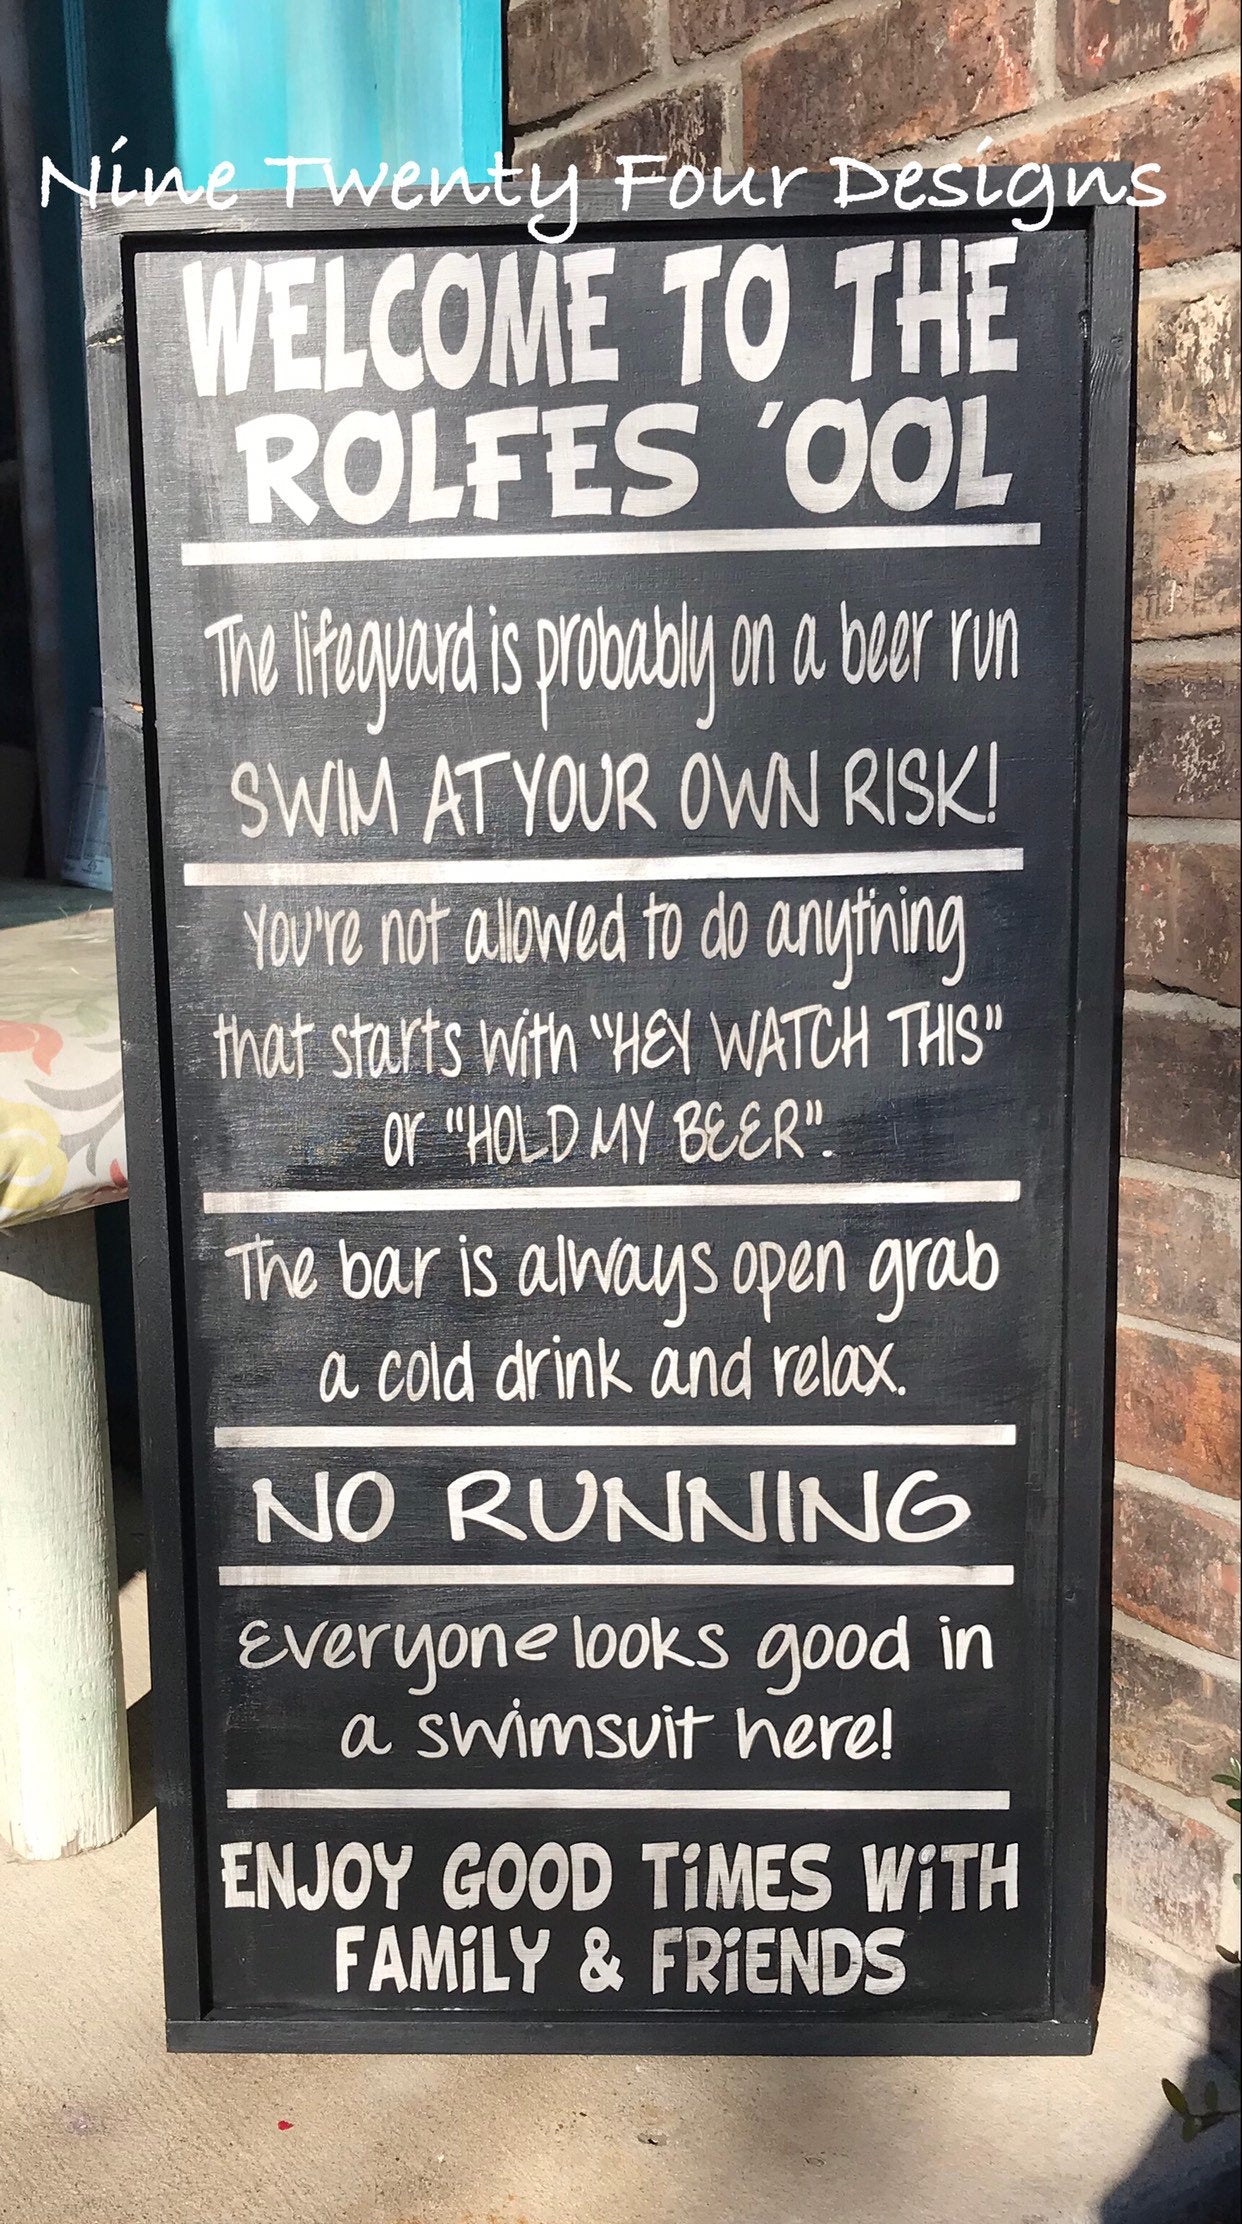 pool rules, pool sign, outdoor sign